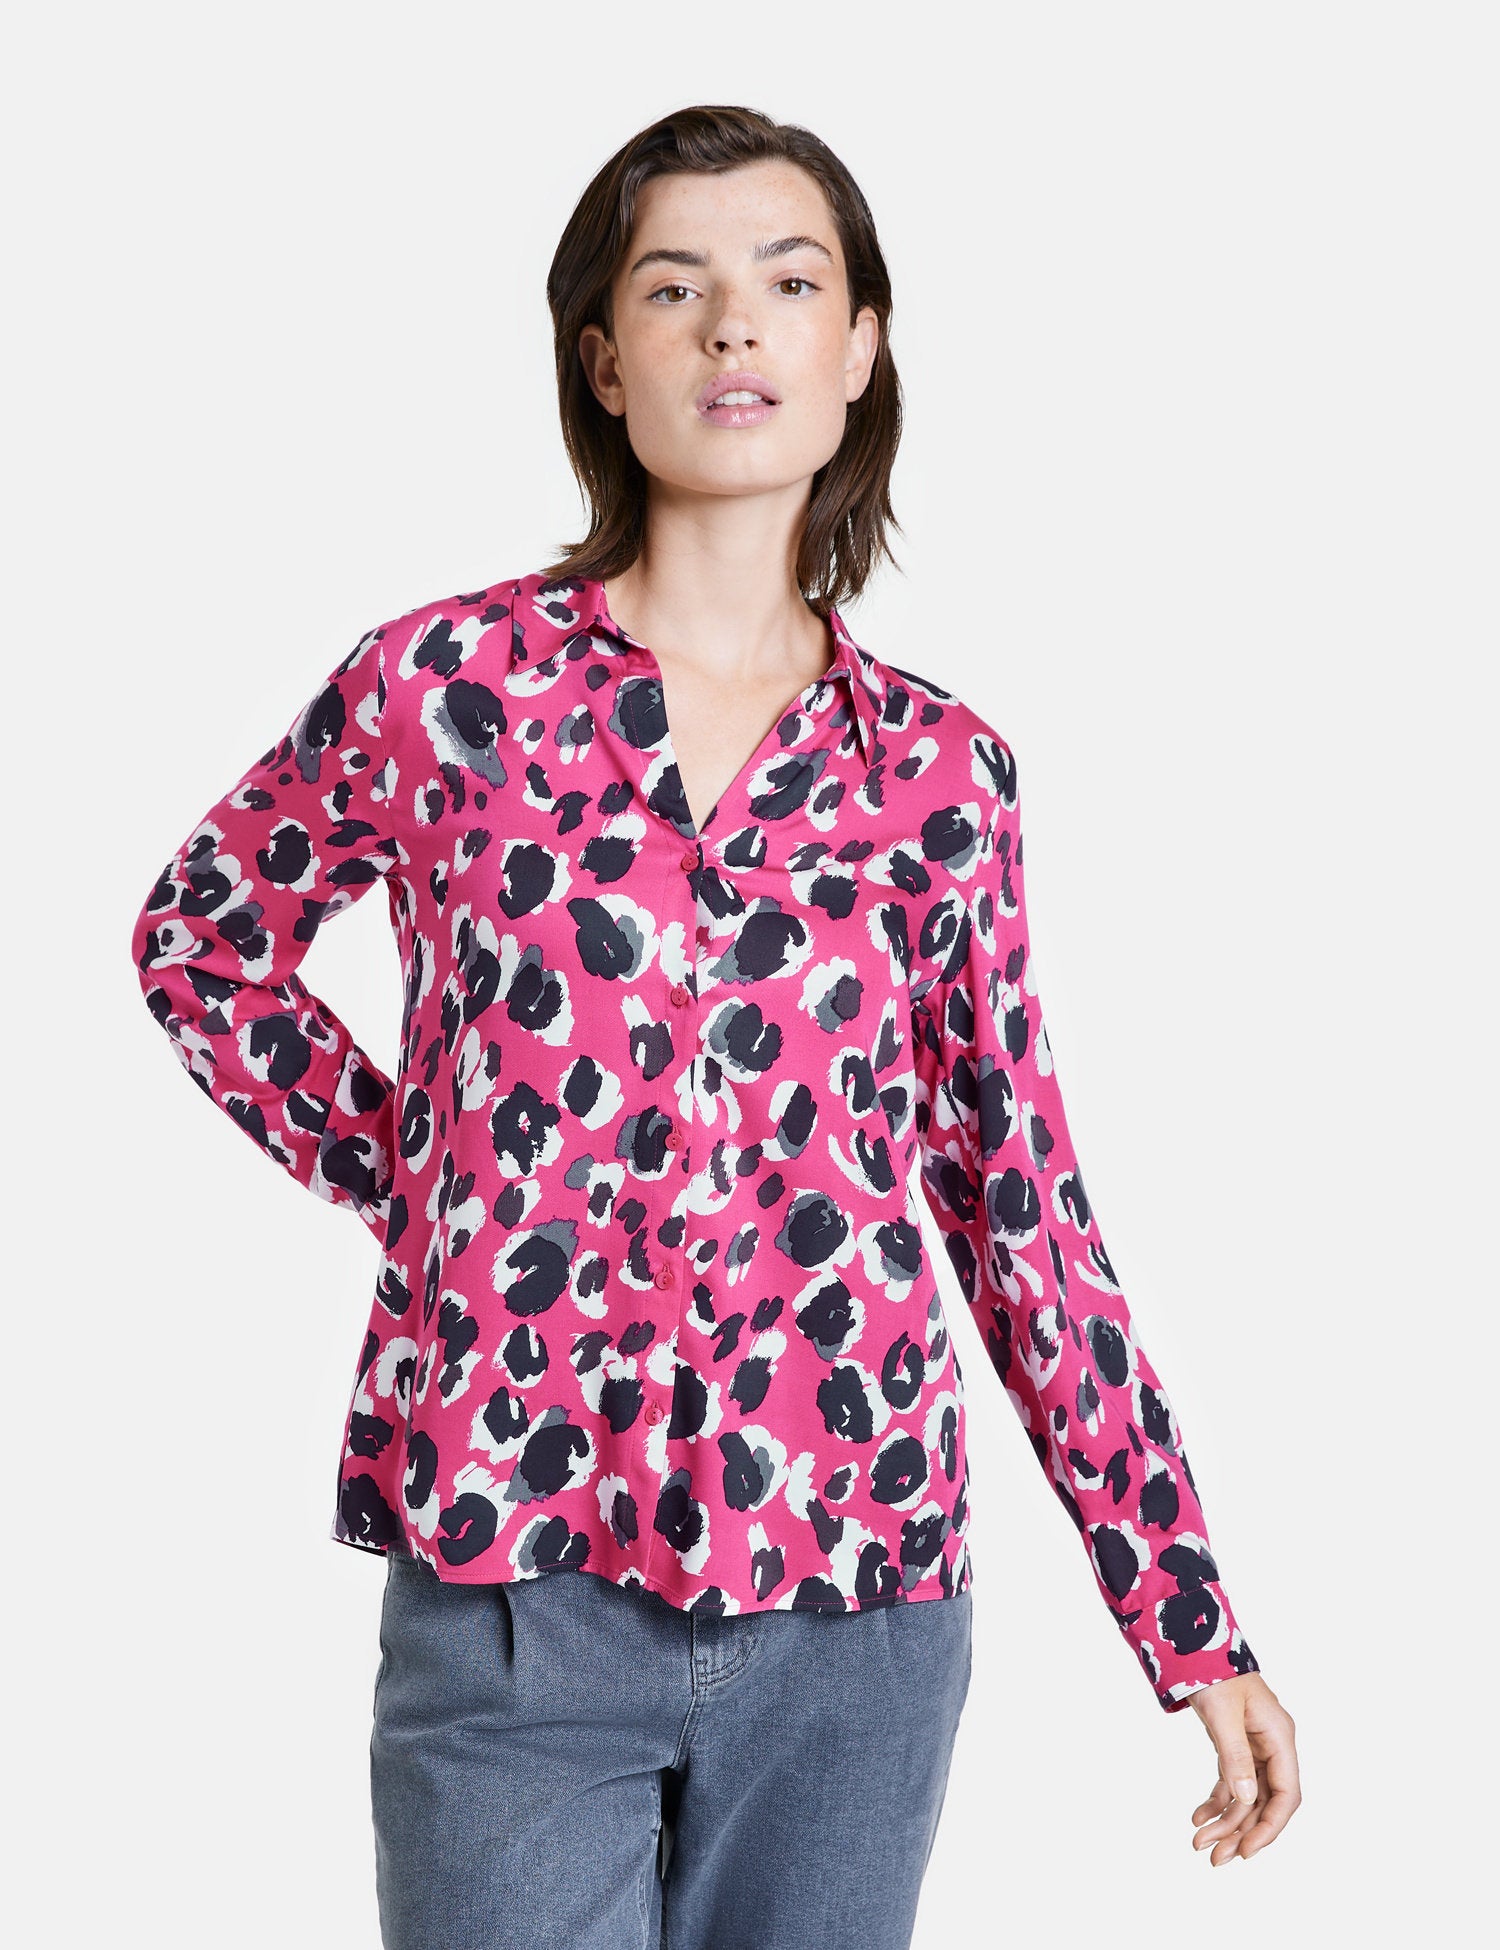 Blouse With An Animal Print_460420-11210_3402_07